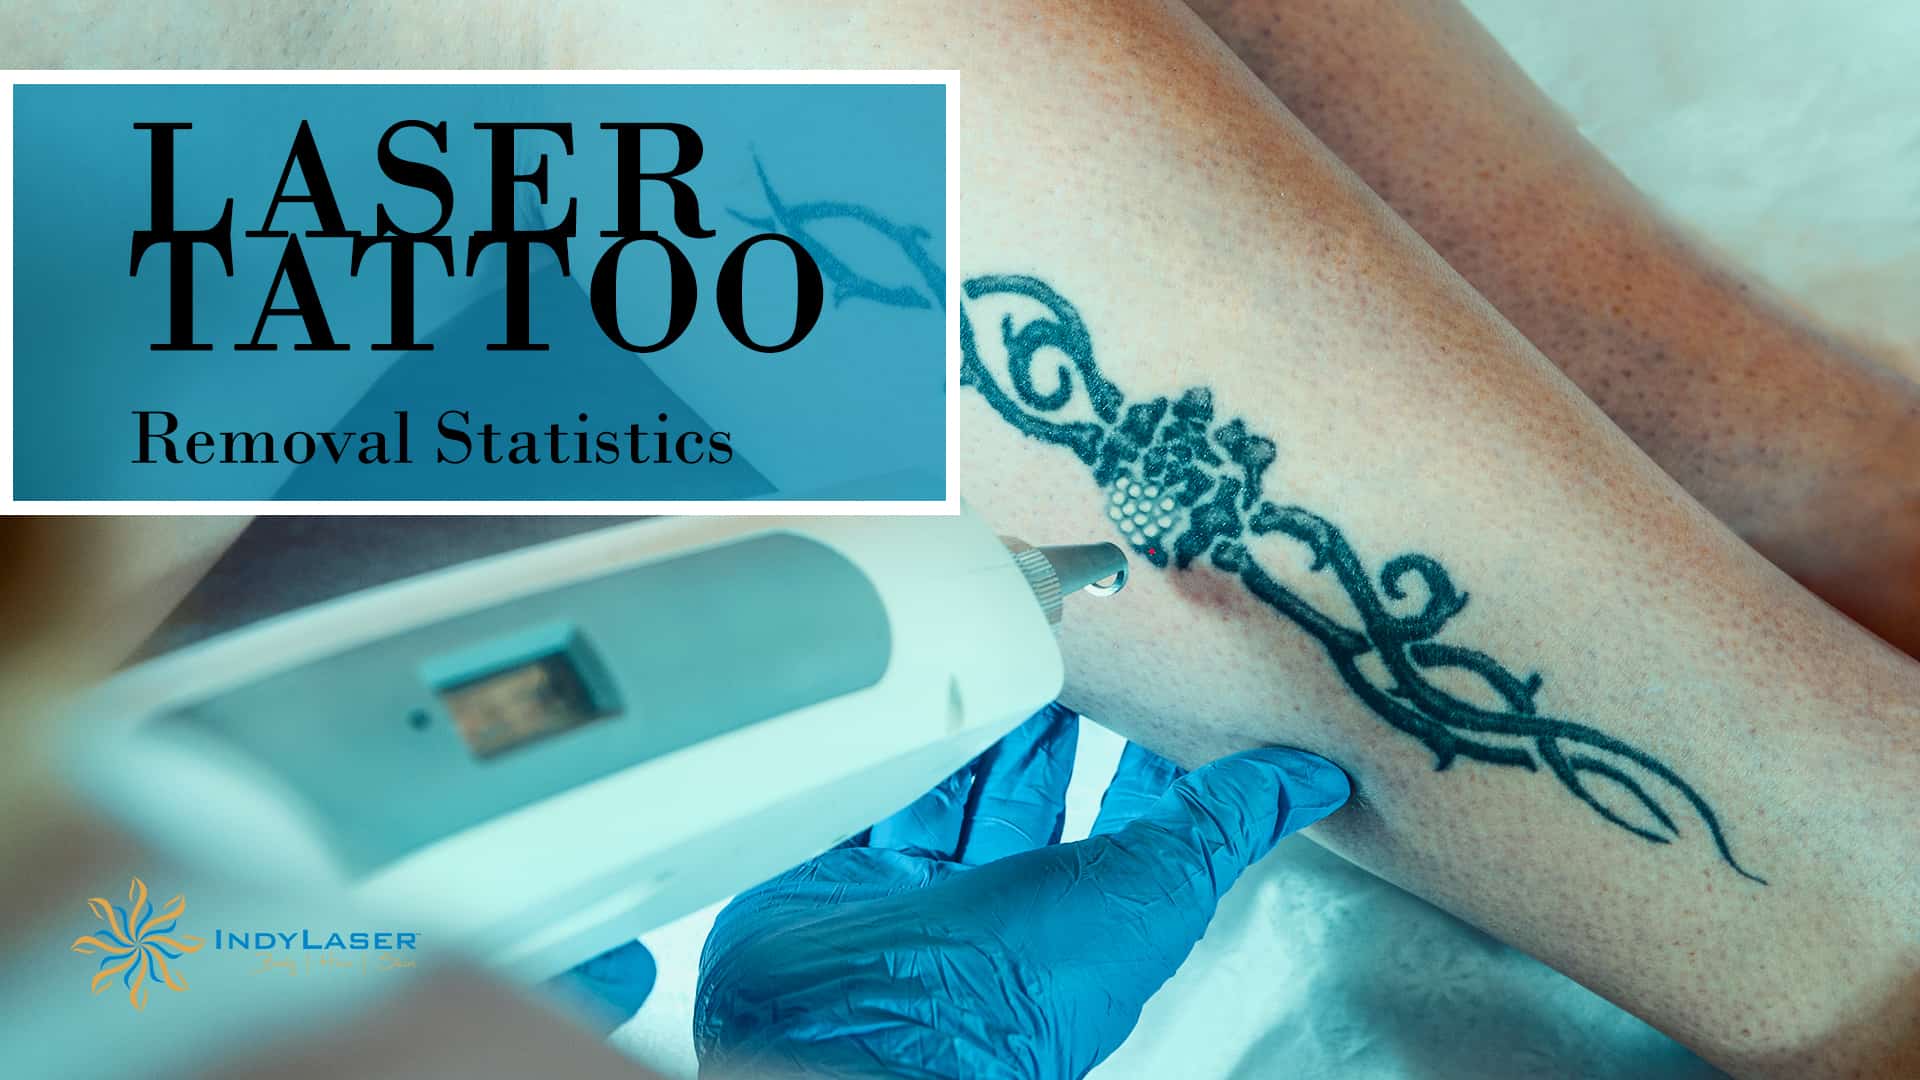 Podcast: How Many People Regret Their Tattoo? | FiveThirtyEight